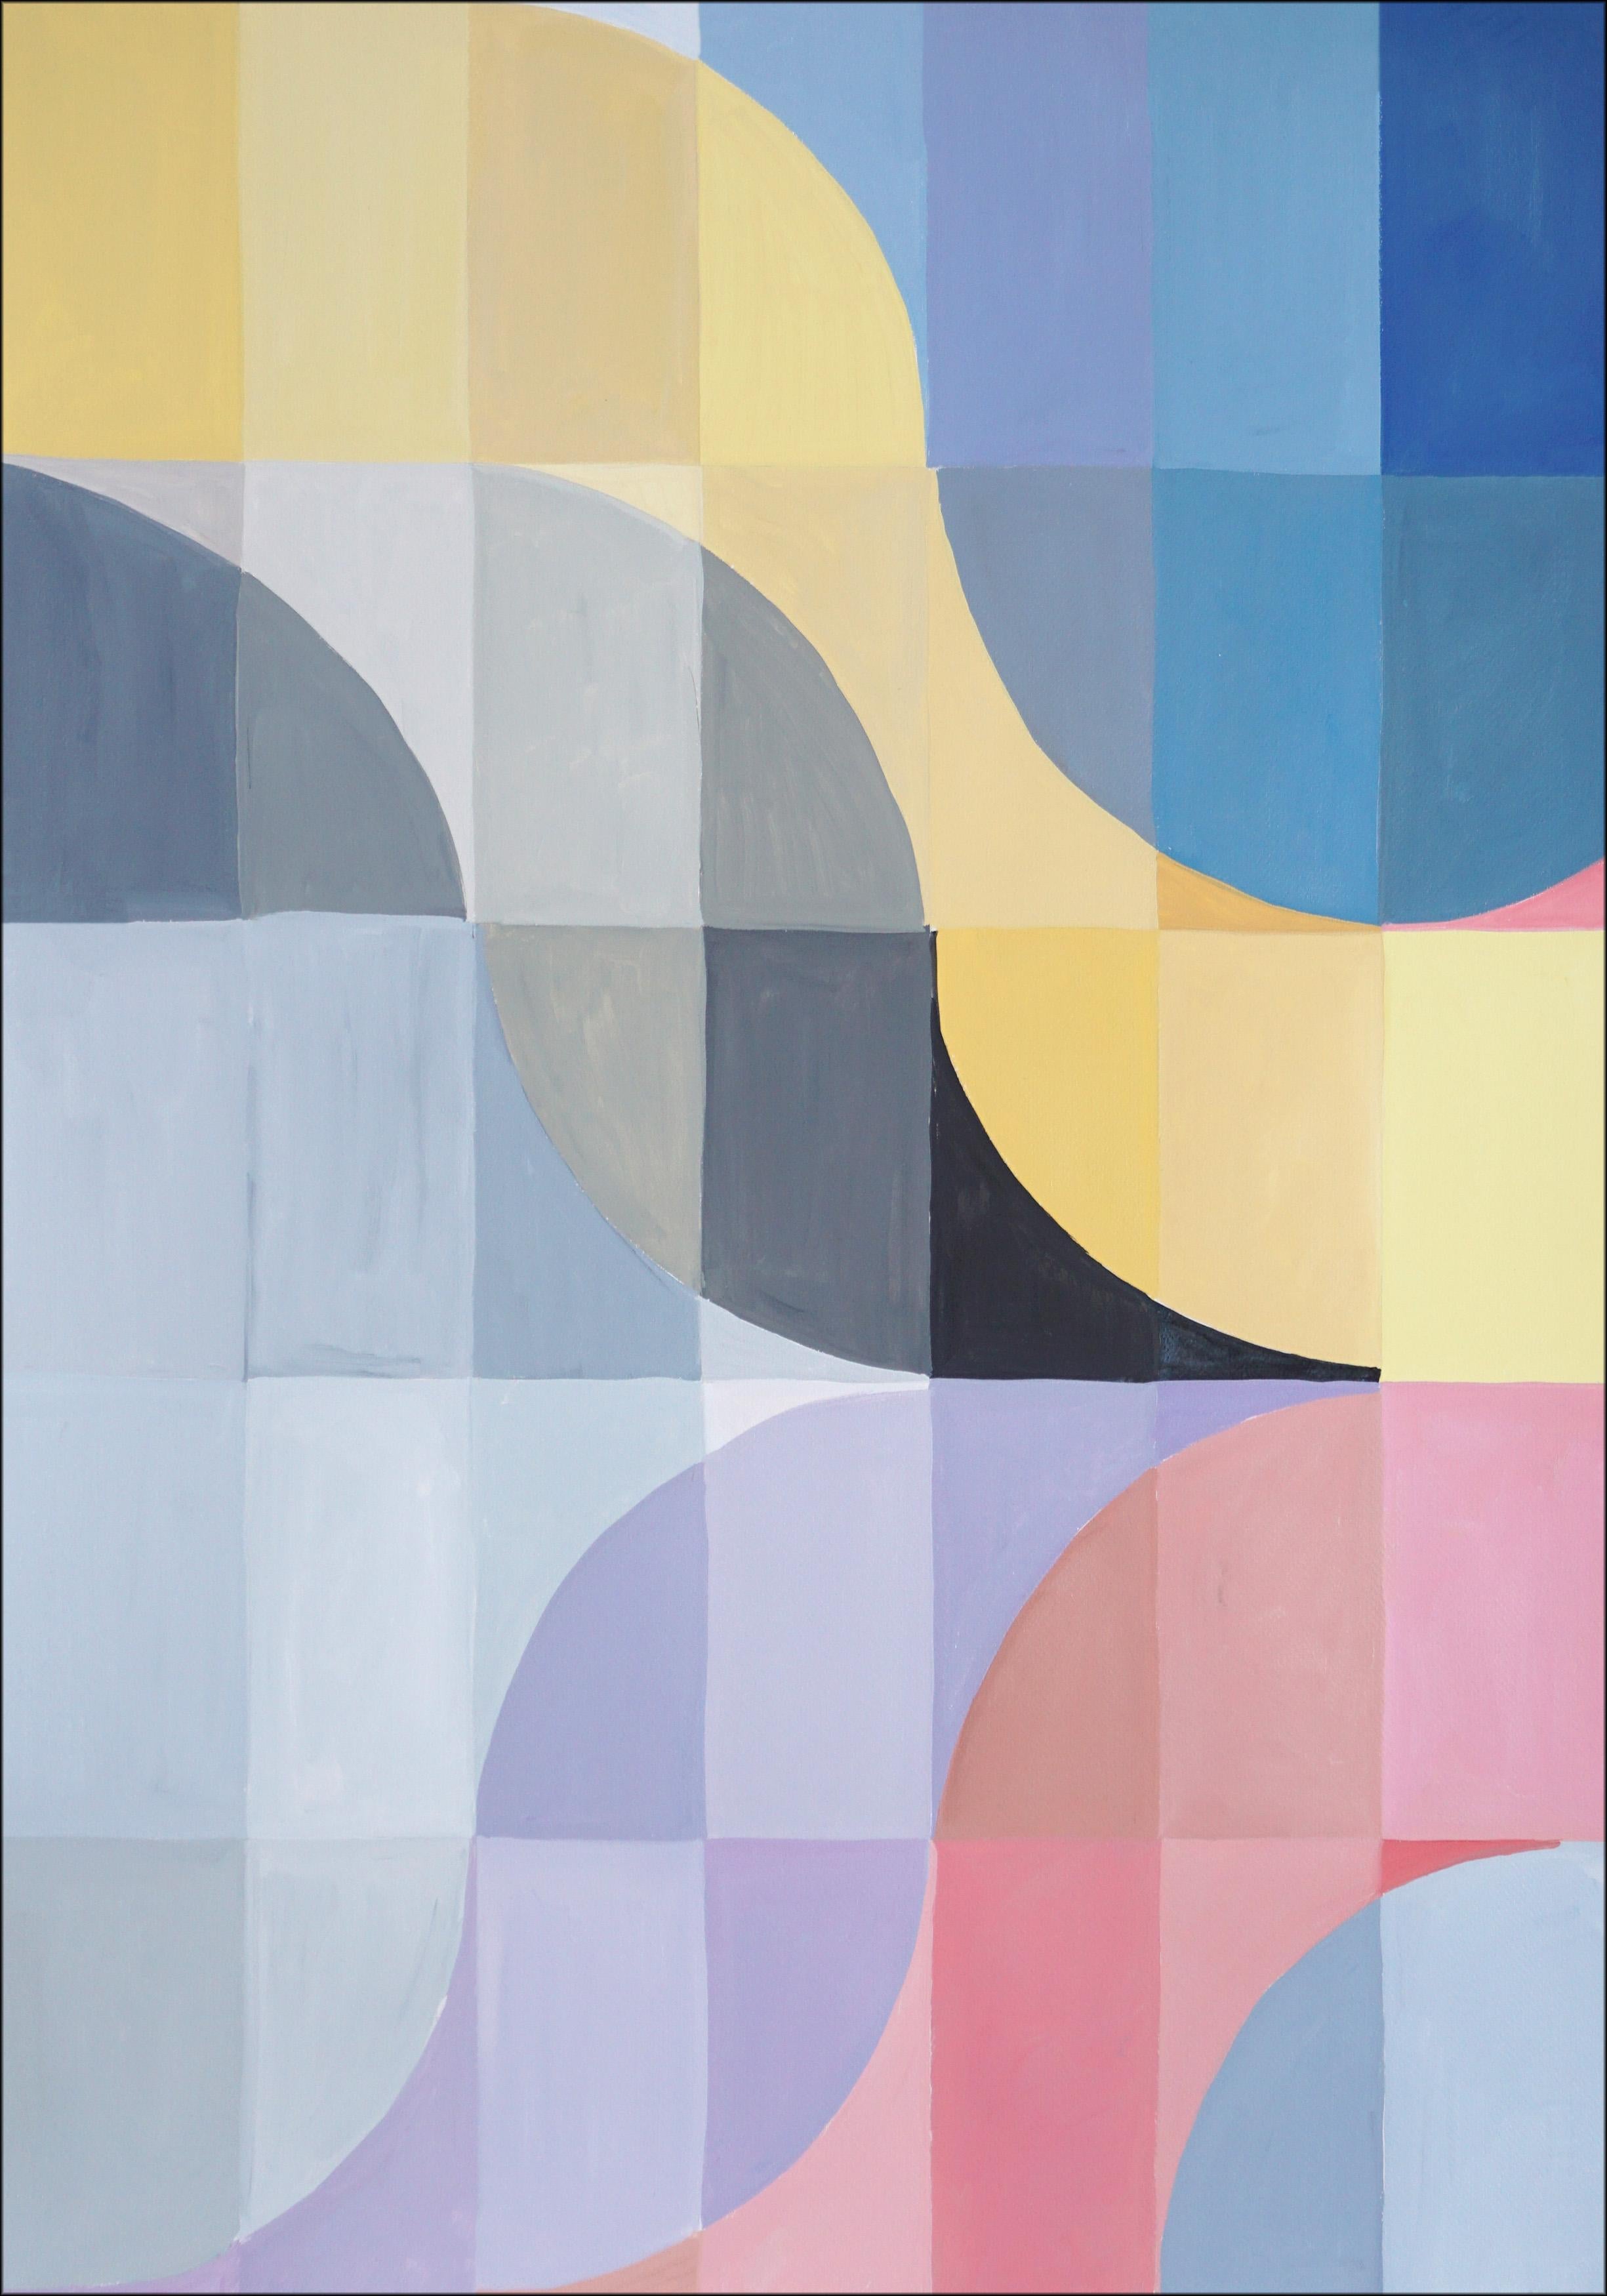 Autumn Twilight, Mosaic Diptych in Pin and Blue Grid, Geometric Bauhaus Tiles 1